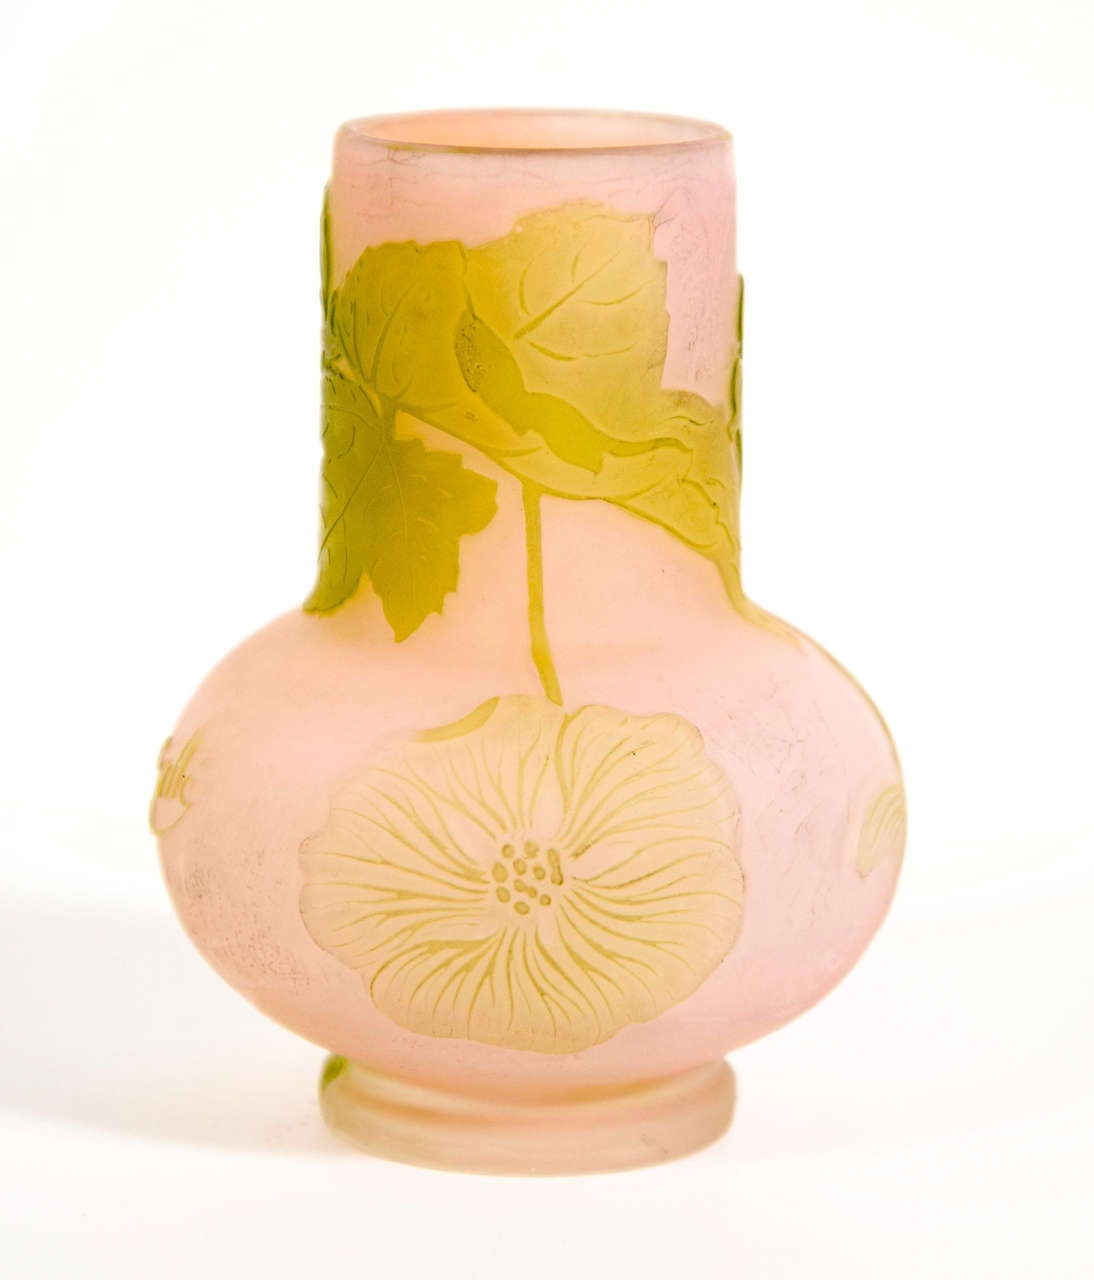 Art Nouveau Pale pink and green double-overlaid and etched glass vase adorned with peonies blossoms by the prestigious studios of Emile Gallé. Works by Gallé, especially of such superior craftsmanship, are highly collectible and increasingly scarce.